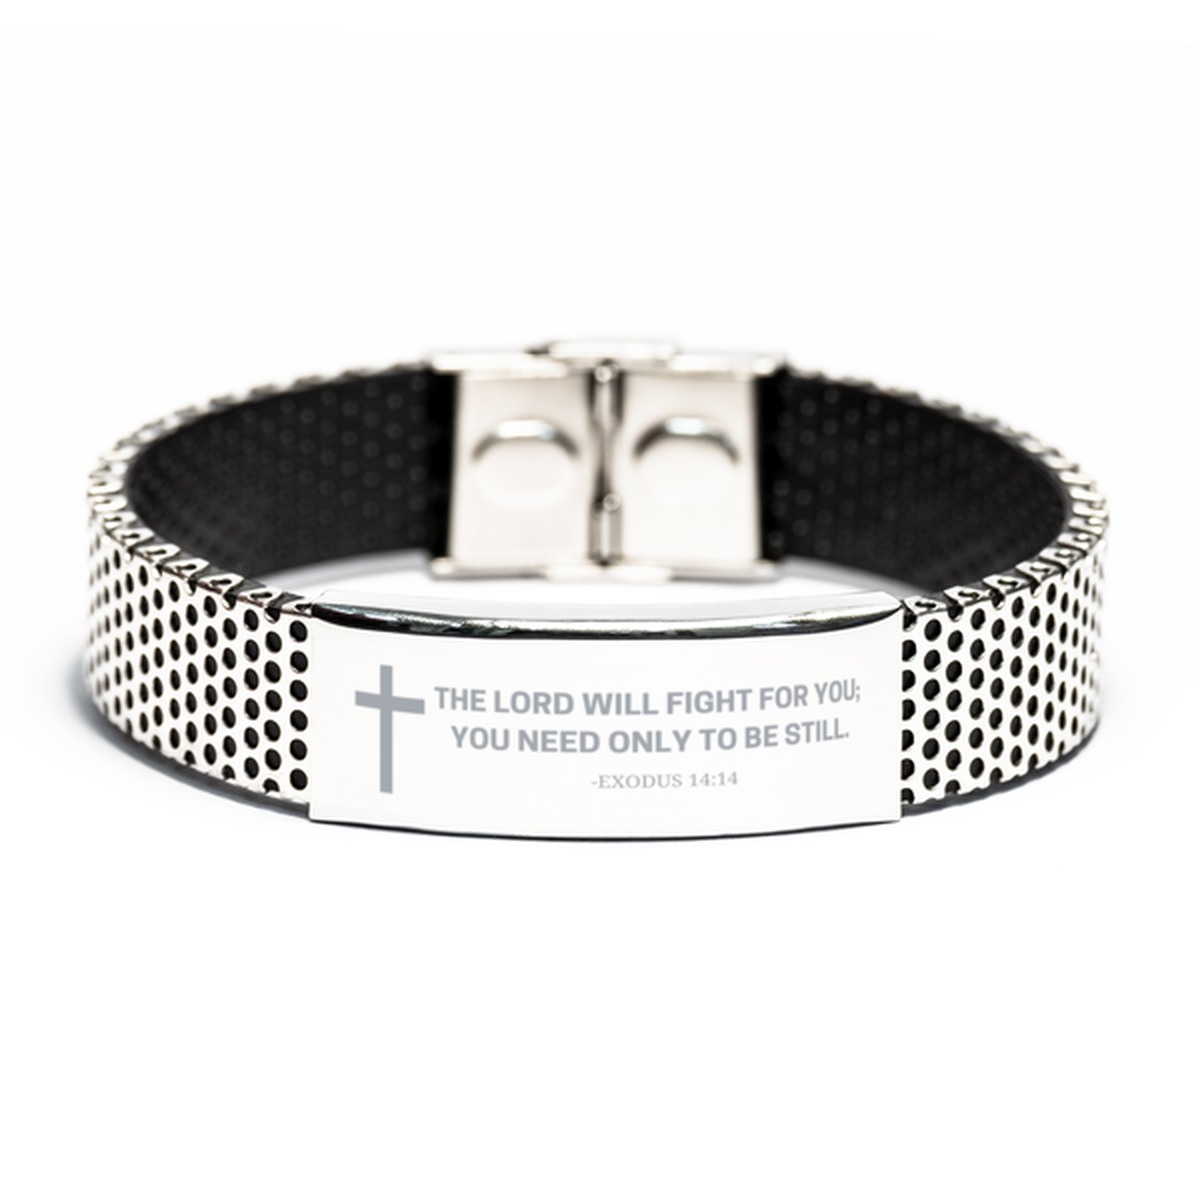 Baptism Gifts For Teenage Boys Girls, Christian Bible Verse Stainless Steel Bracelet, The Lord will fight for you, Catholic Confirmation Gifts for Son, Godson, Grandson, Nephew